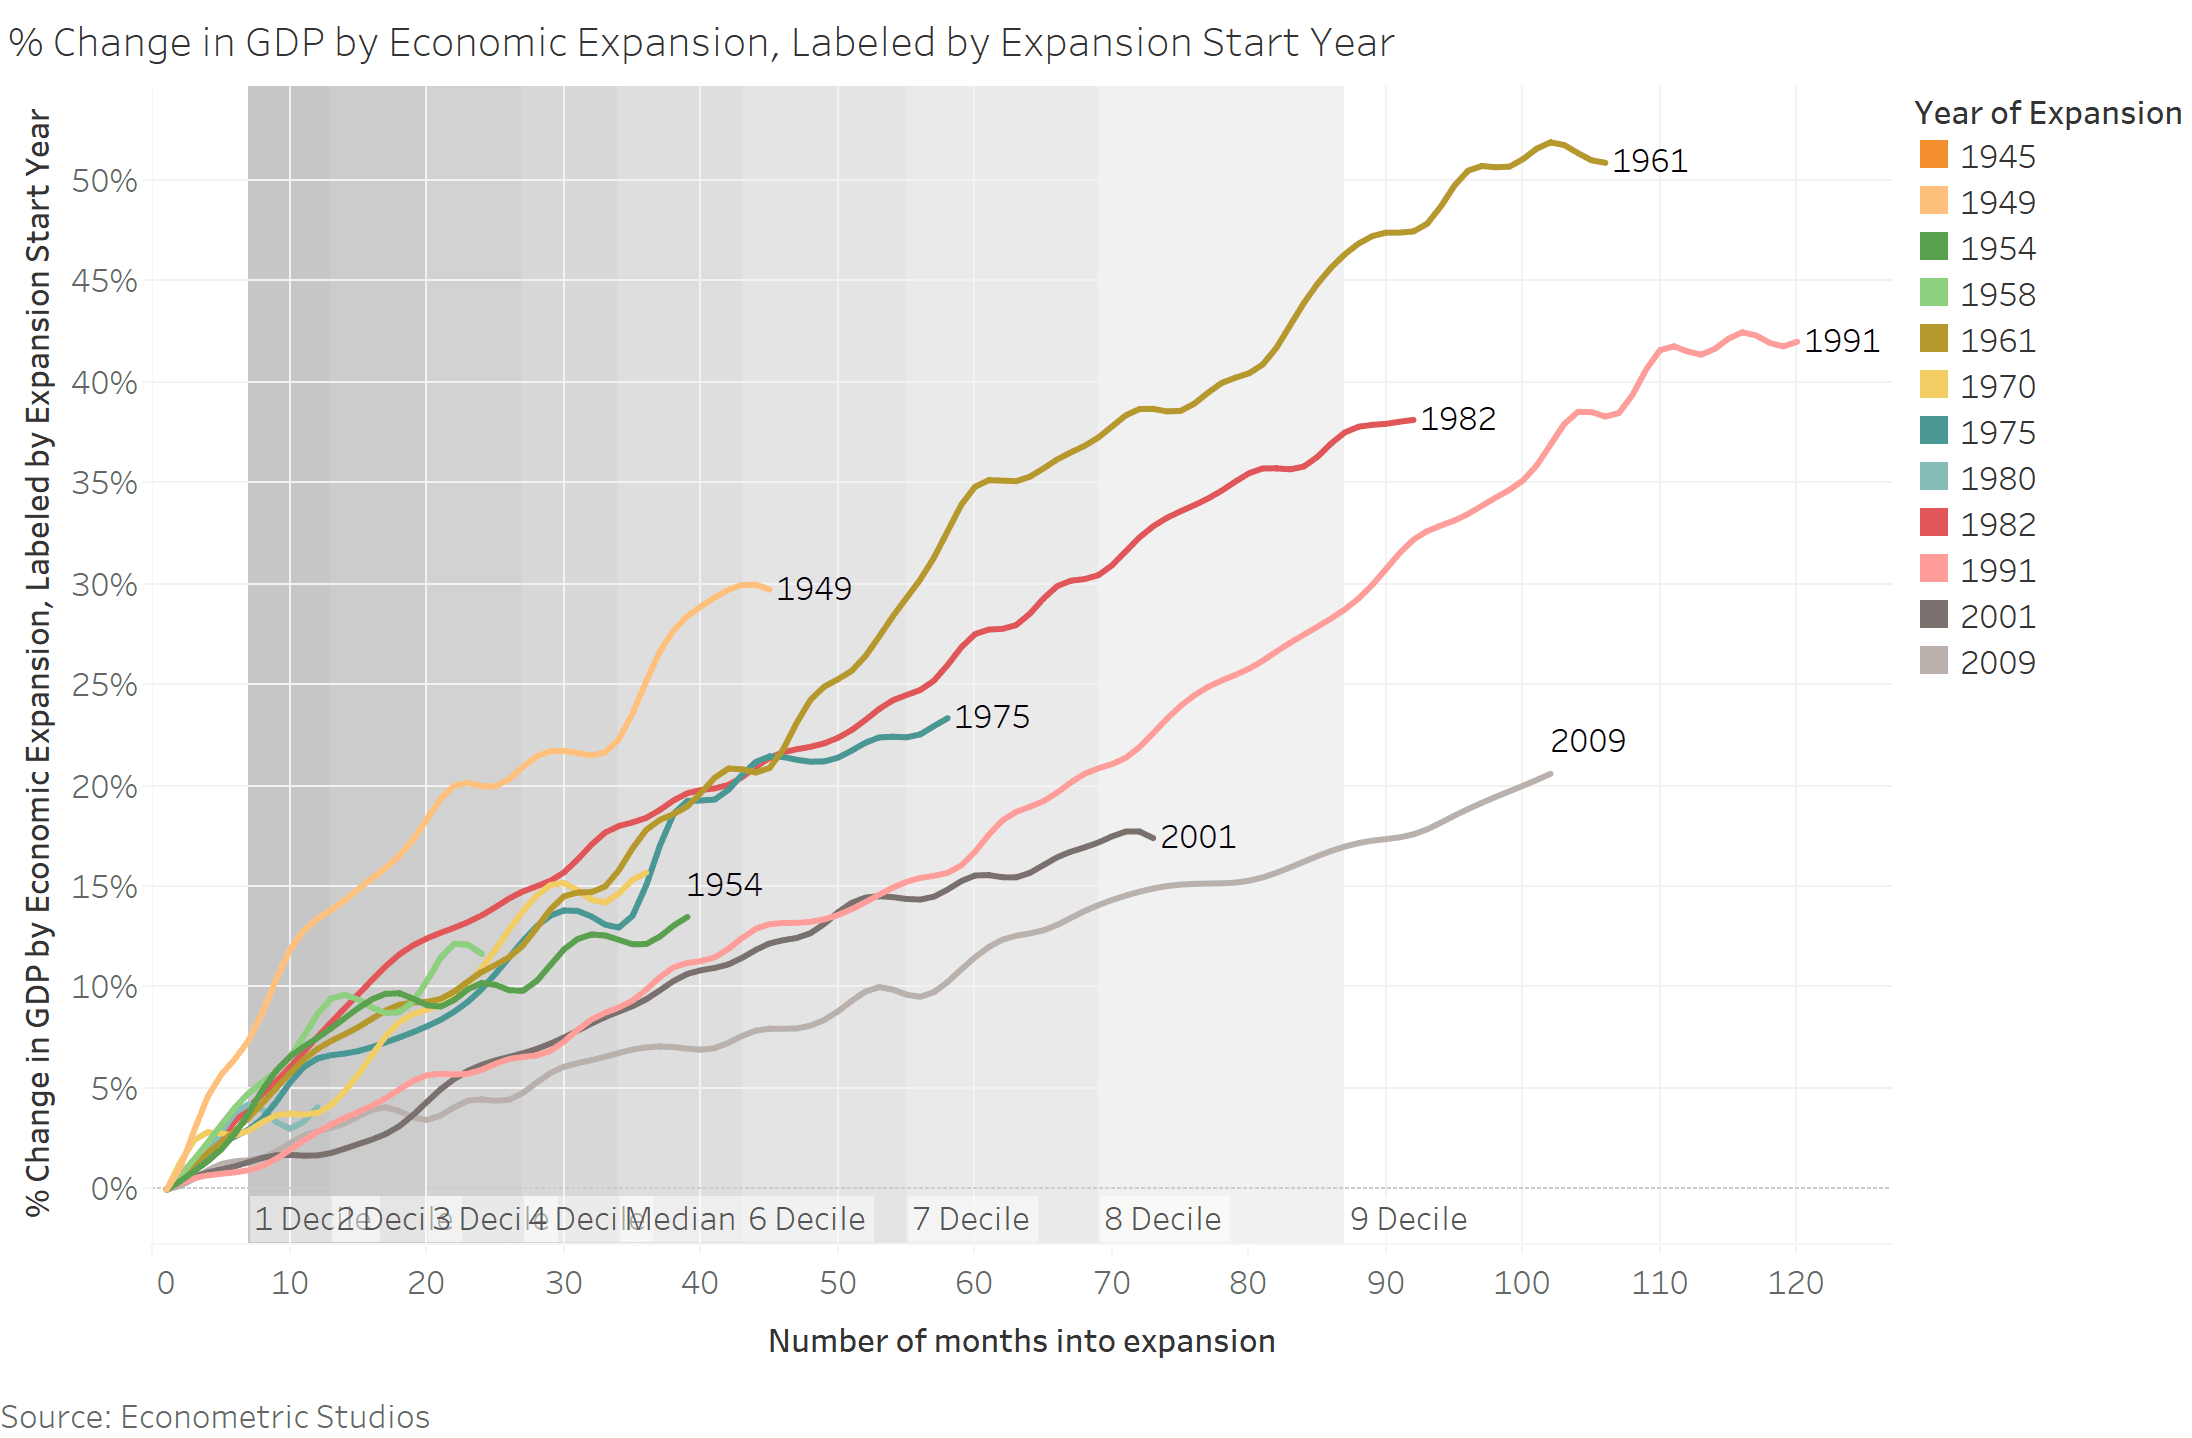 Change in GDP by Economic Expansion Labeled by Expansion Start Year